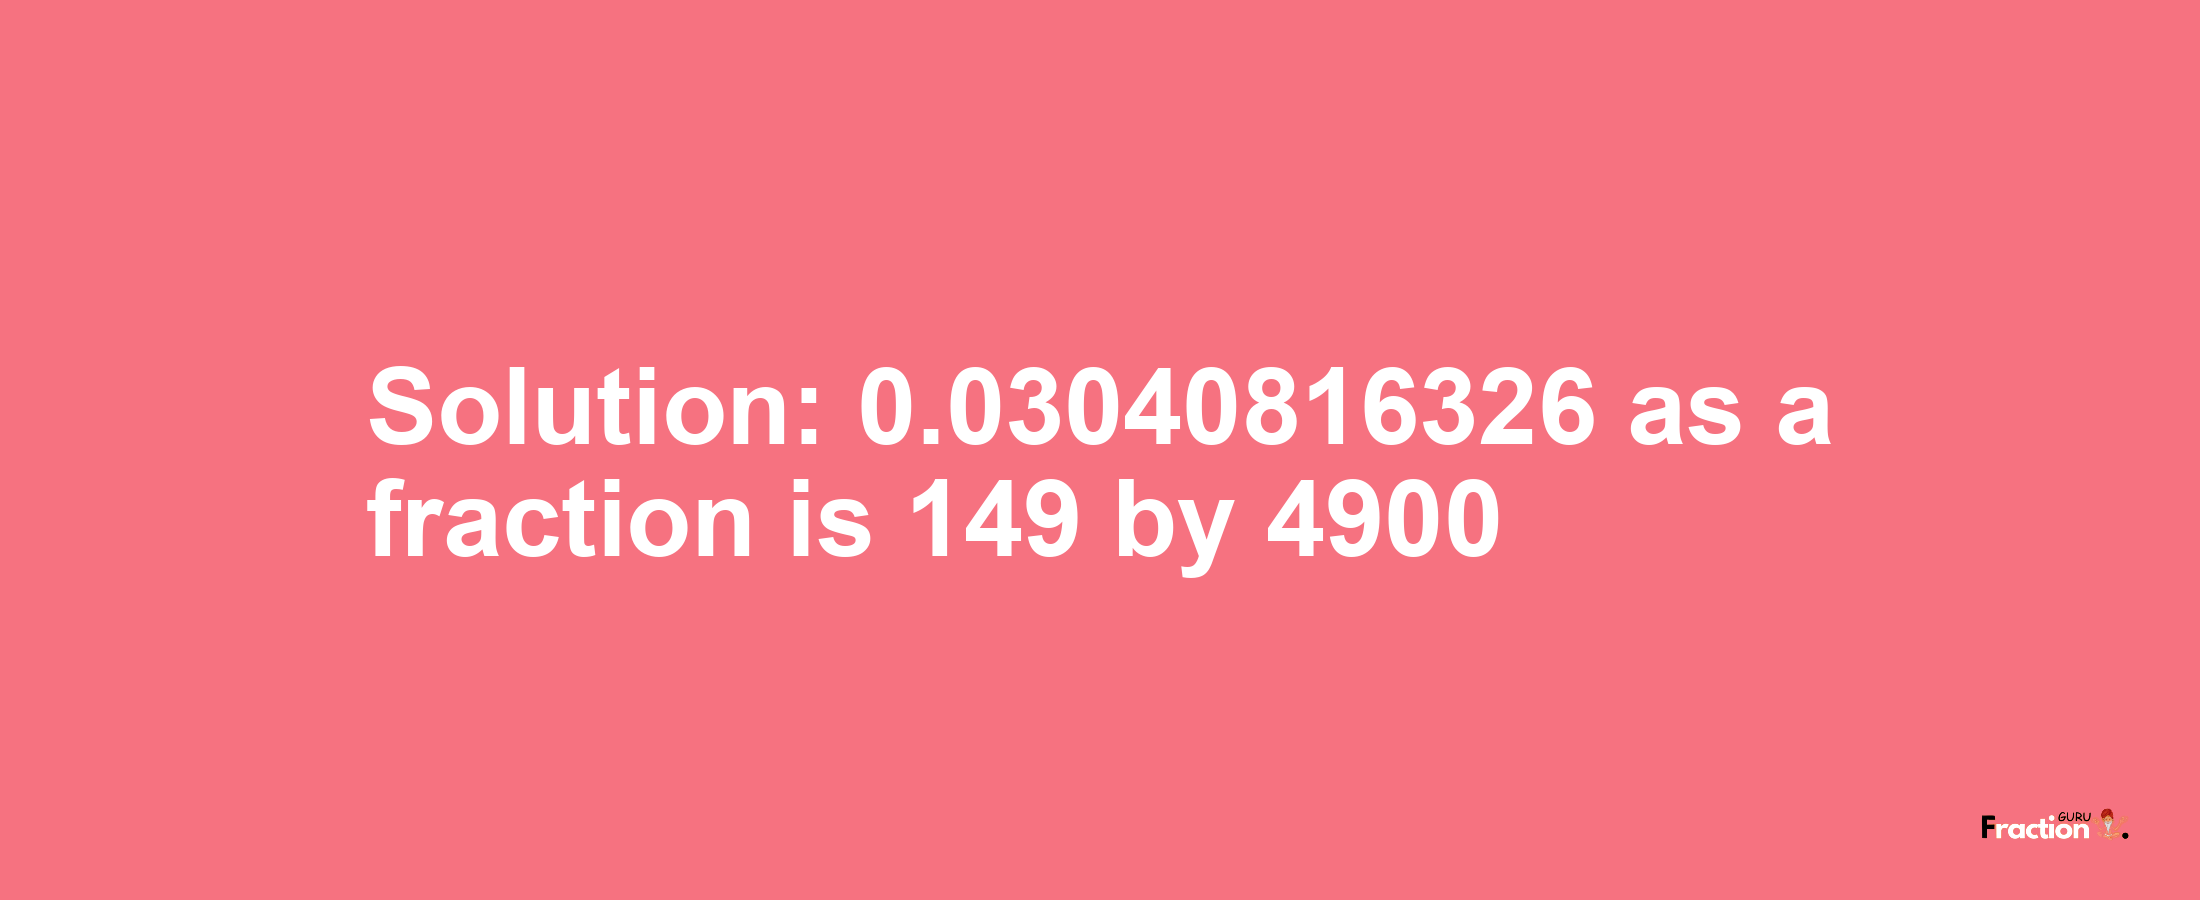 Solution:0.03040816326 as a fraction is 149/4900